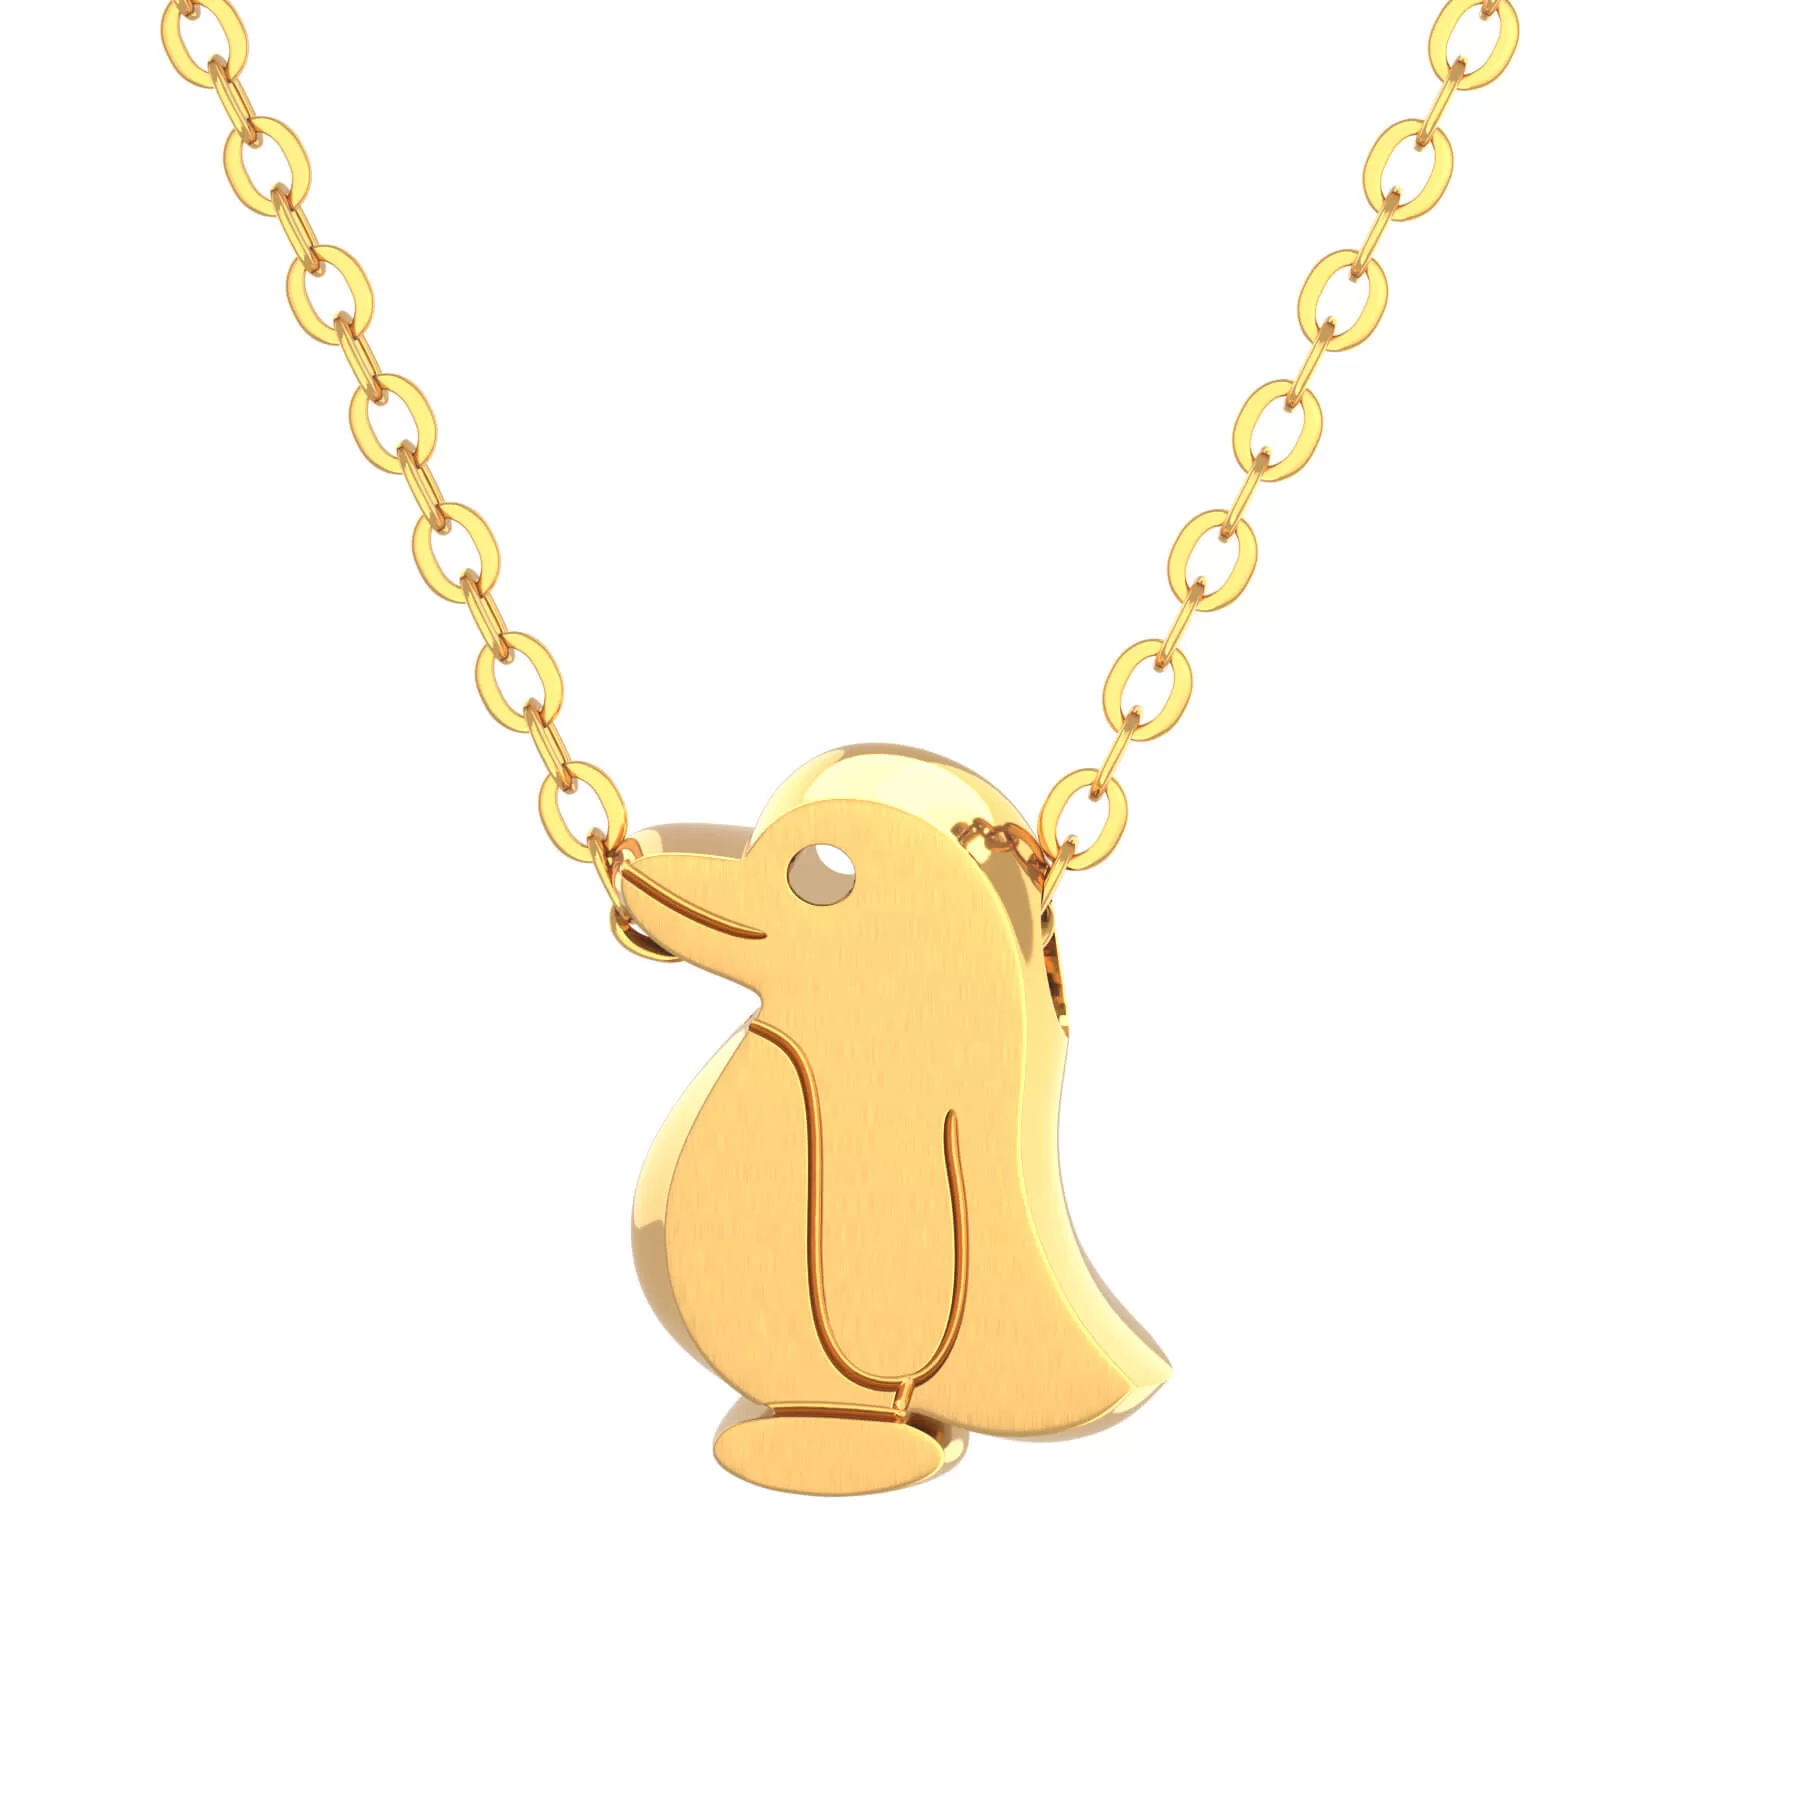 Lucky Penguin Necklace | Penguin necklace, Necklace, Necklace types